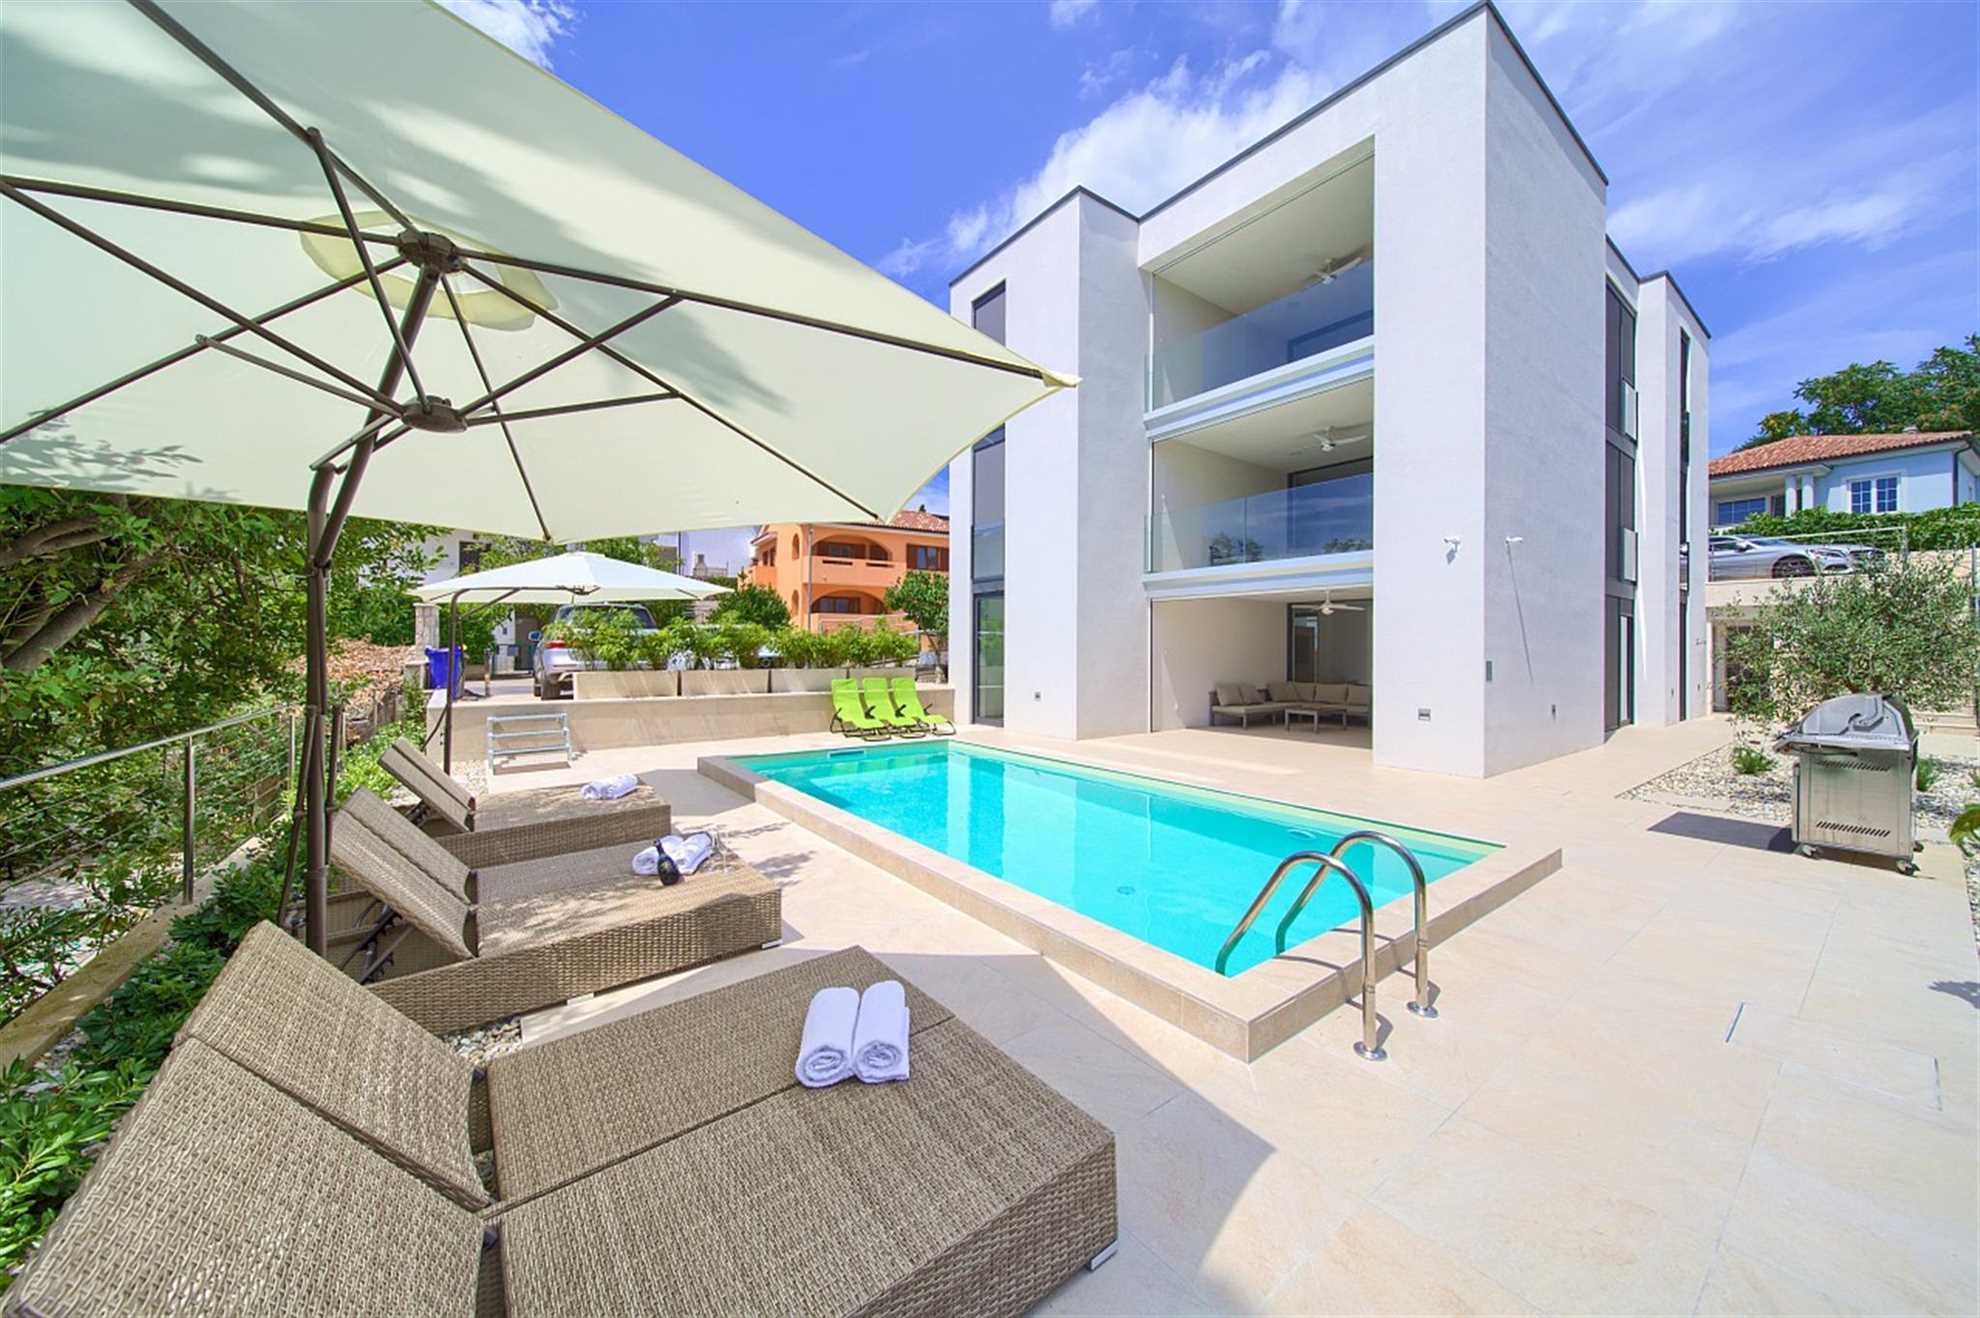 Villa Celeia - Luxurious first floor apartment with heated pool in city centre of Krk